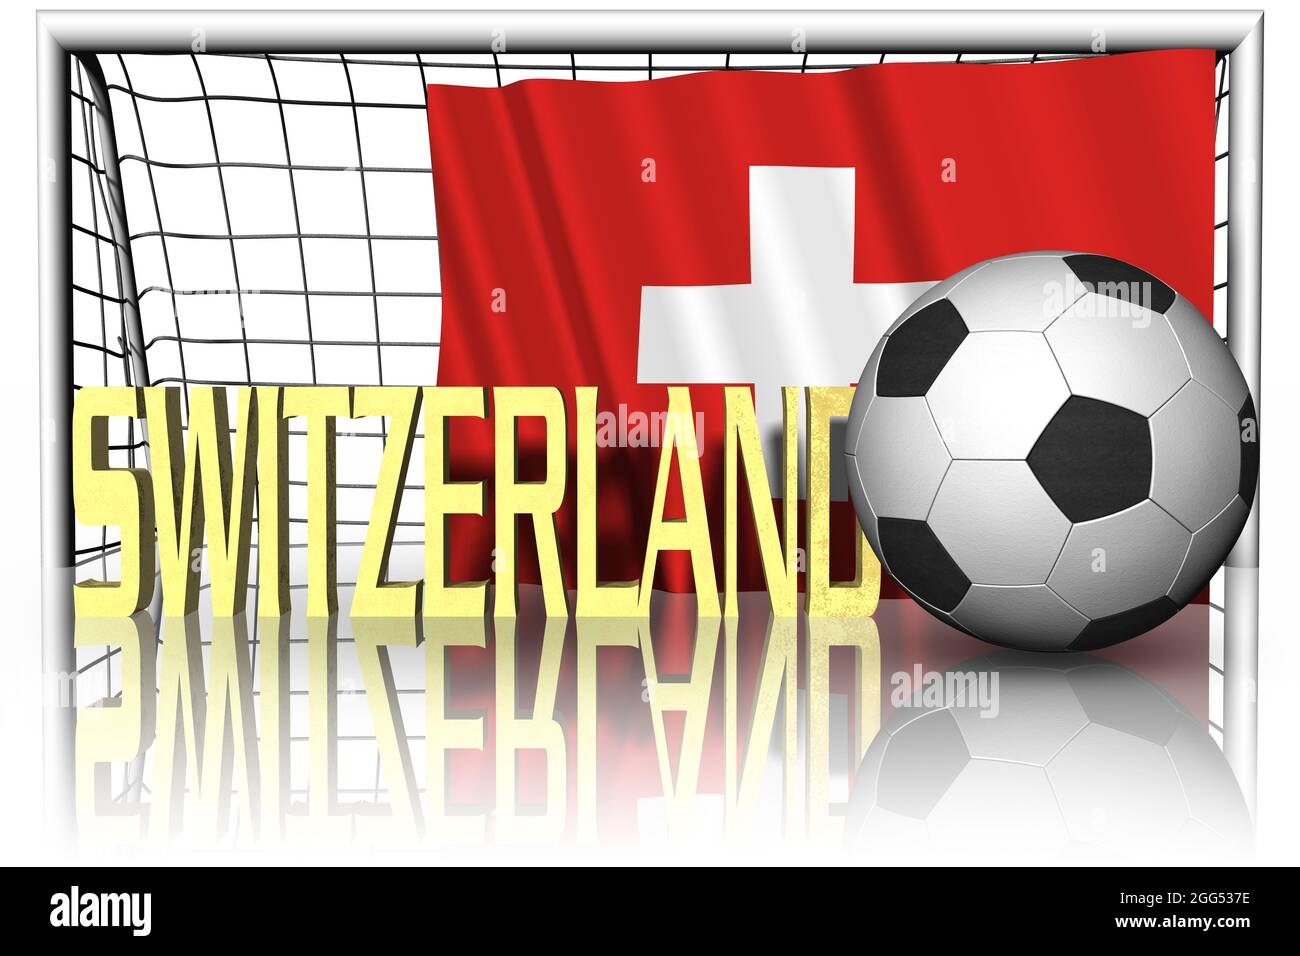 Switzerland. National flag with soccer ball in the foreground. Sport football - 3D Illustration Stock Photo